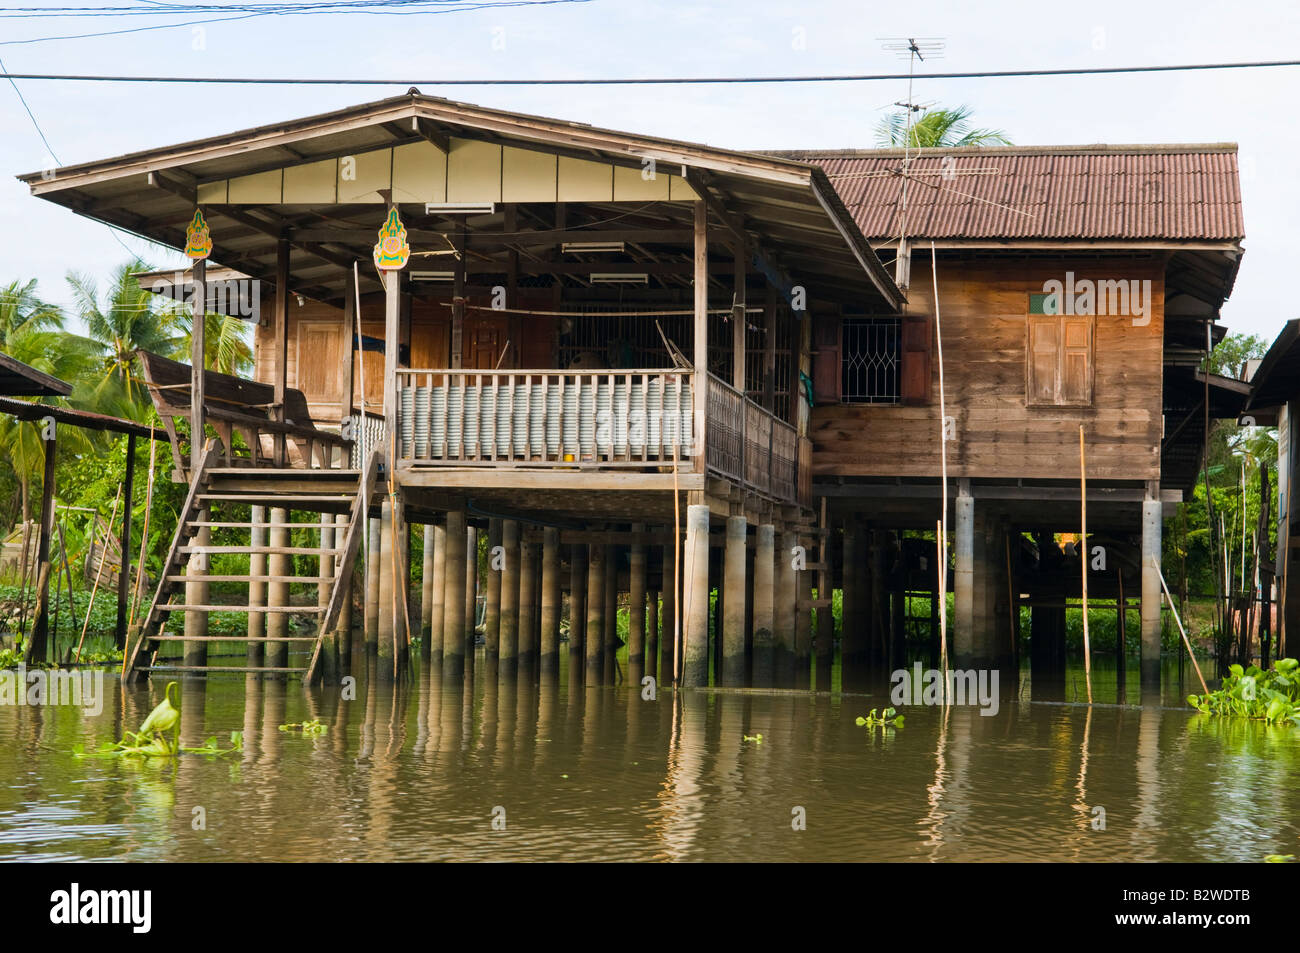 traditional-wooden-thai-house-river-canal-home-B2WDTB.jpg